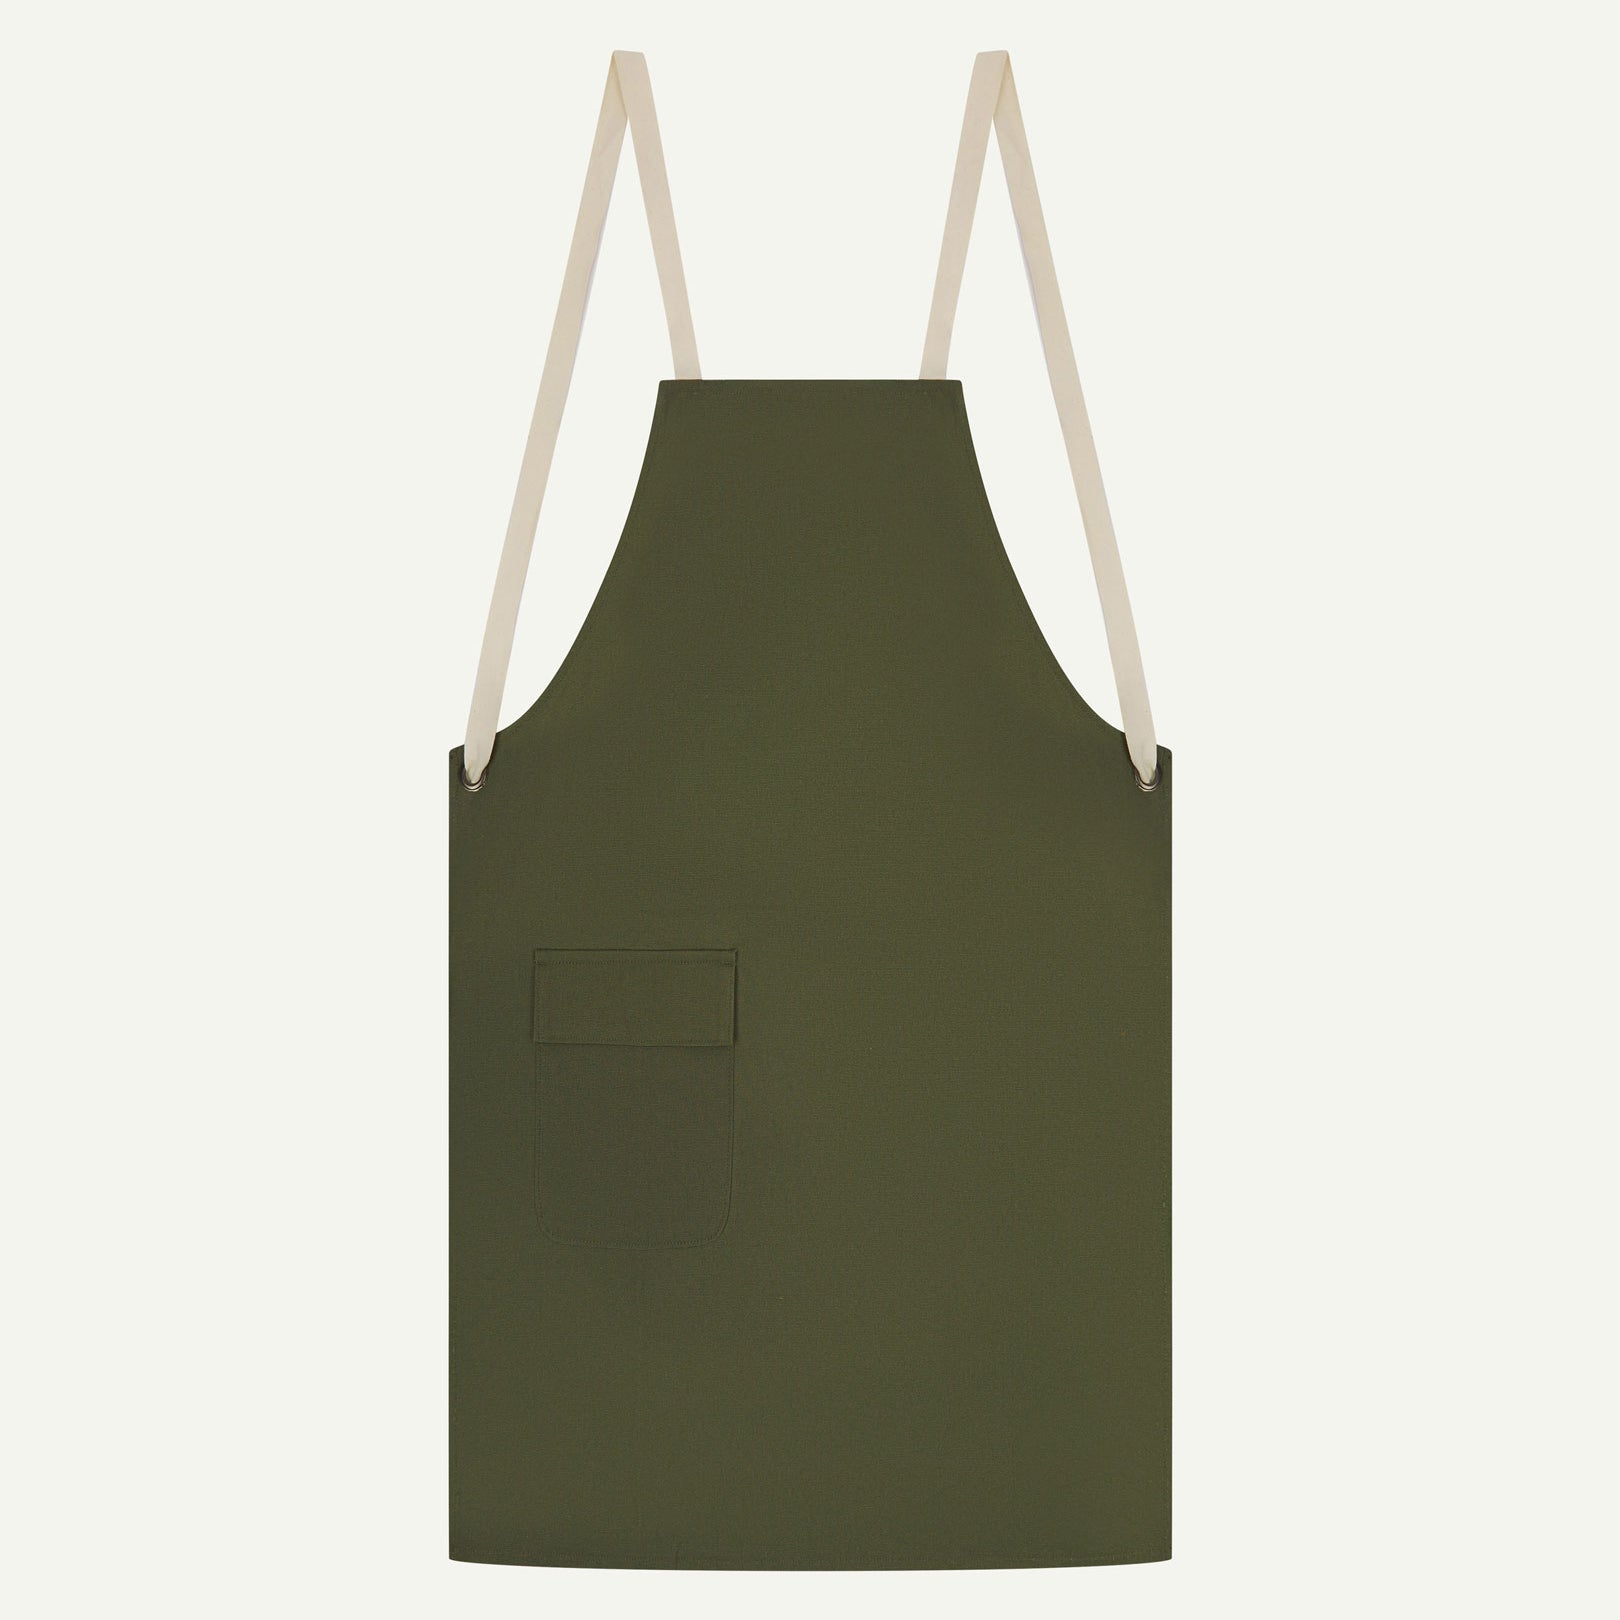 Flat shot of Uskees green canvas apron showing cream straps and front flap pocket.